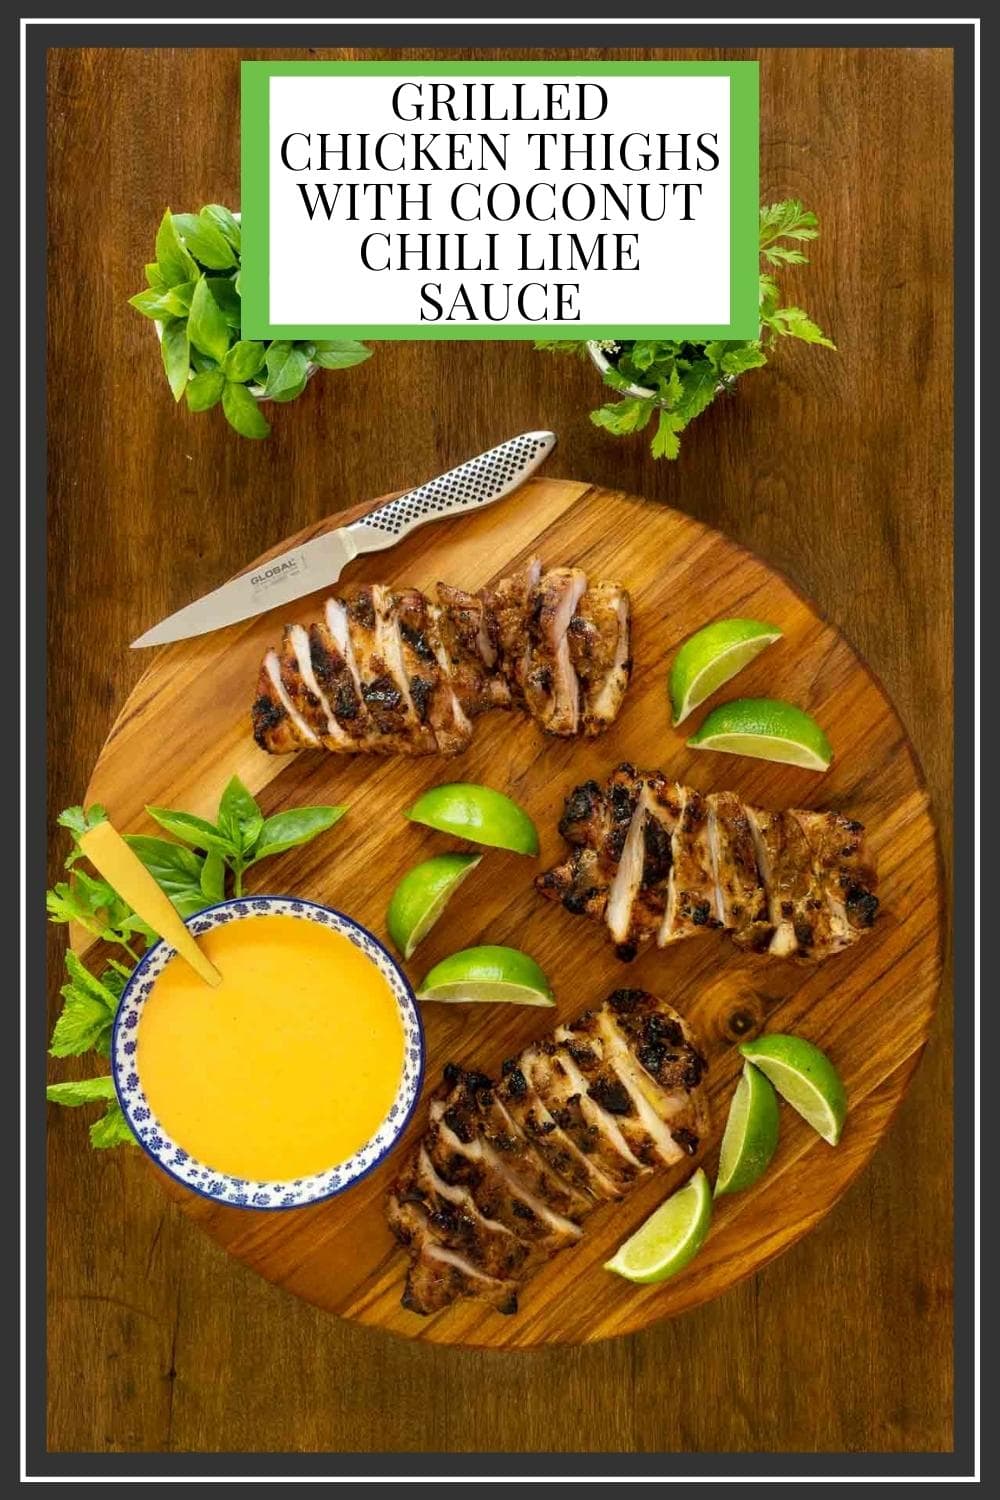 Grilled Chicken Thighs with Coconut Chili Lime Sauce